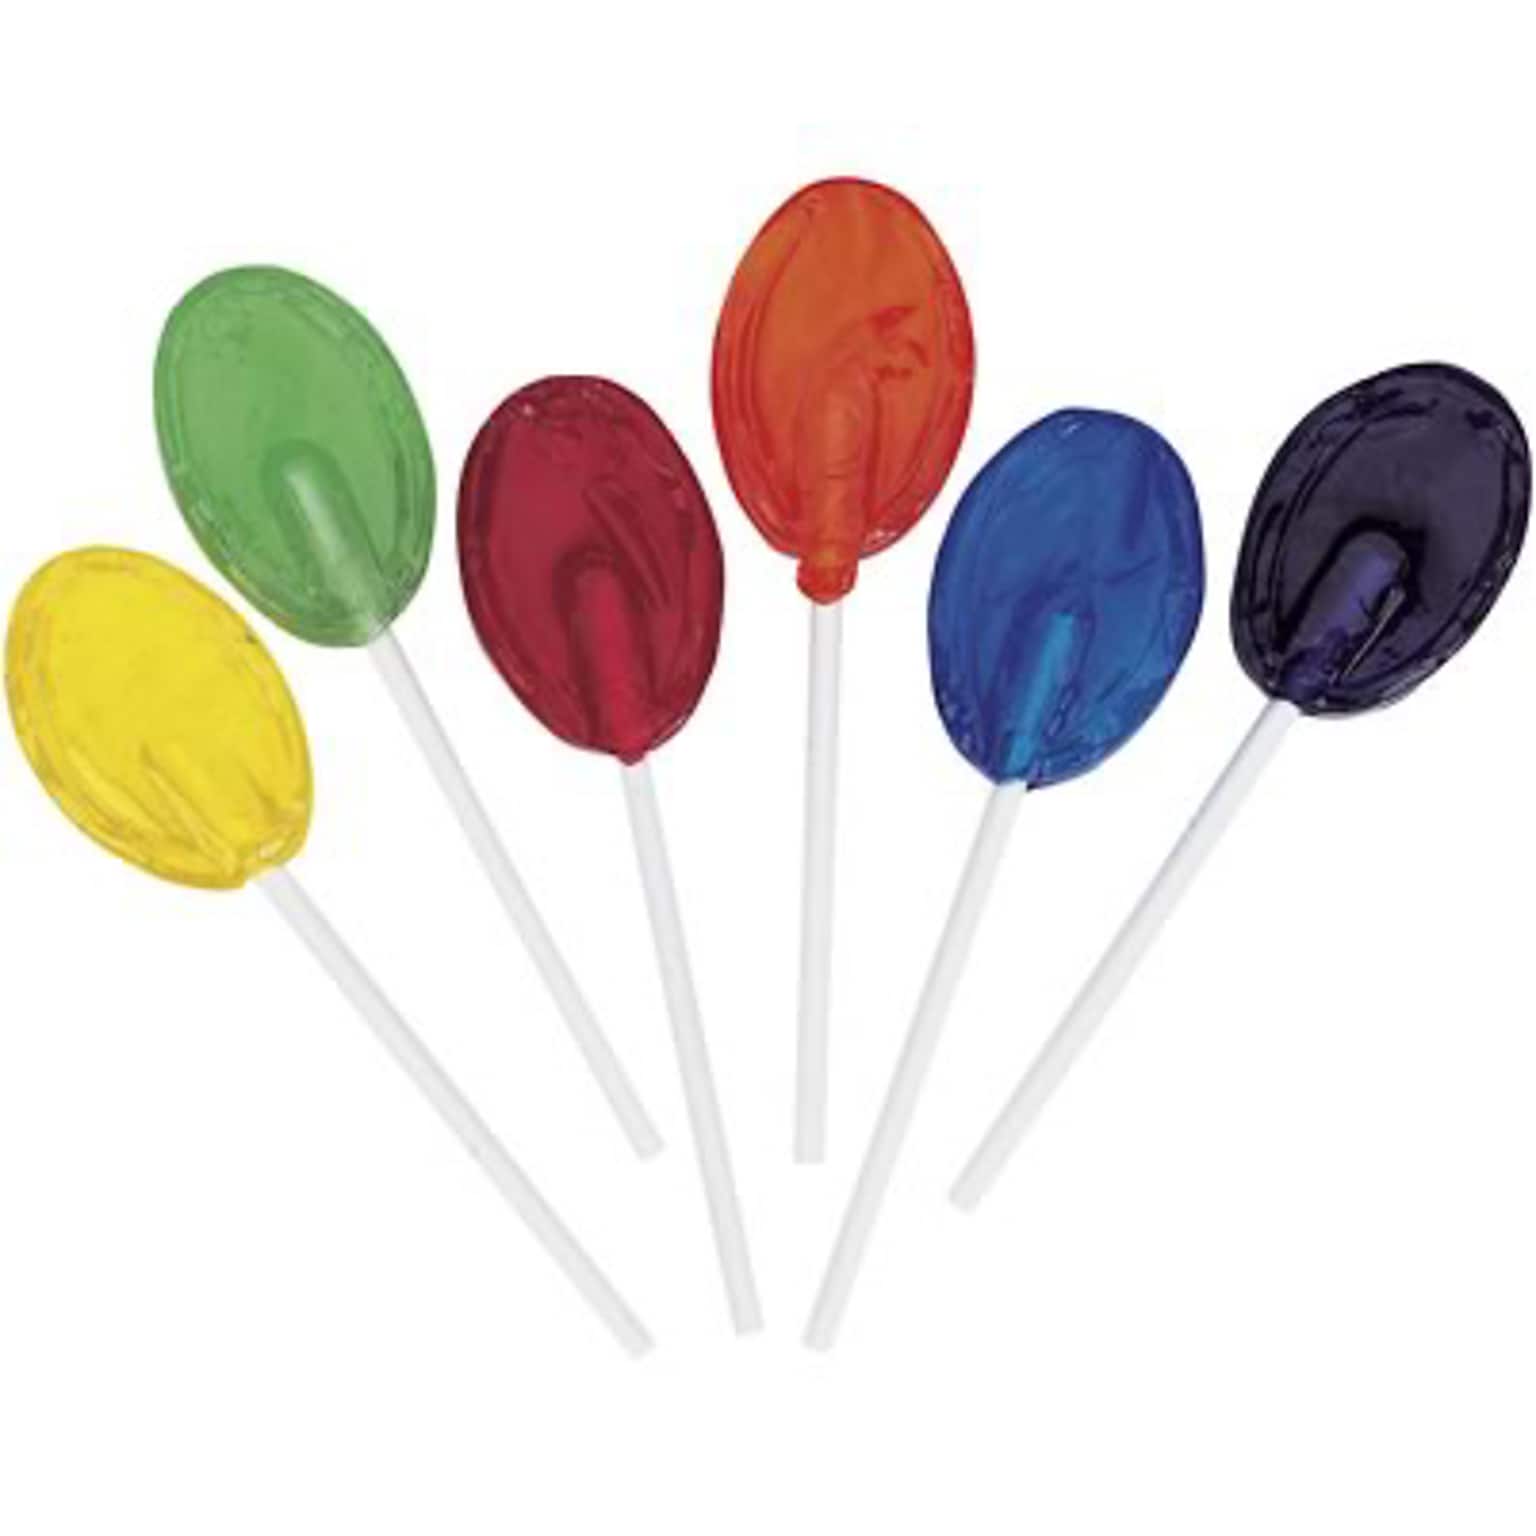 Dr. Johns Candies® Sugarless Lollipops; Assorted Flavors